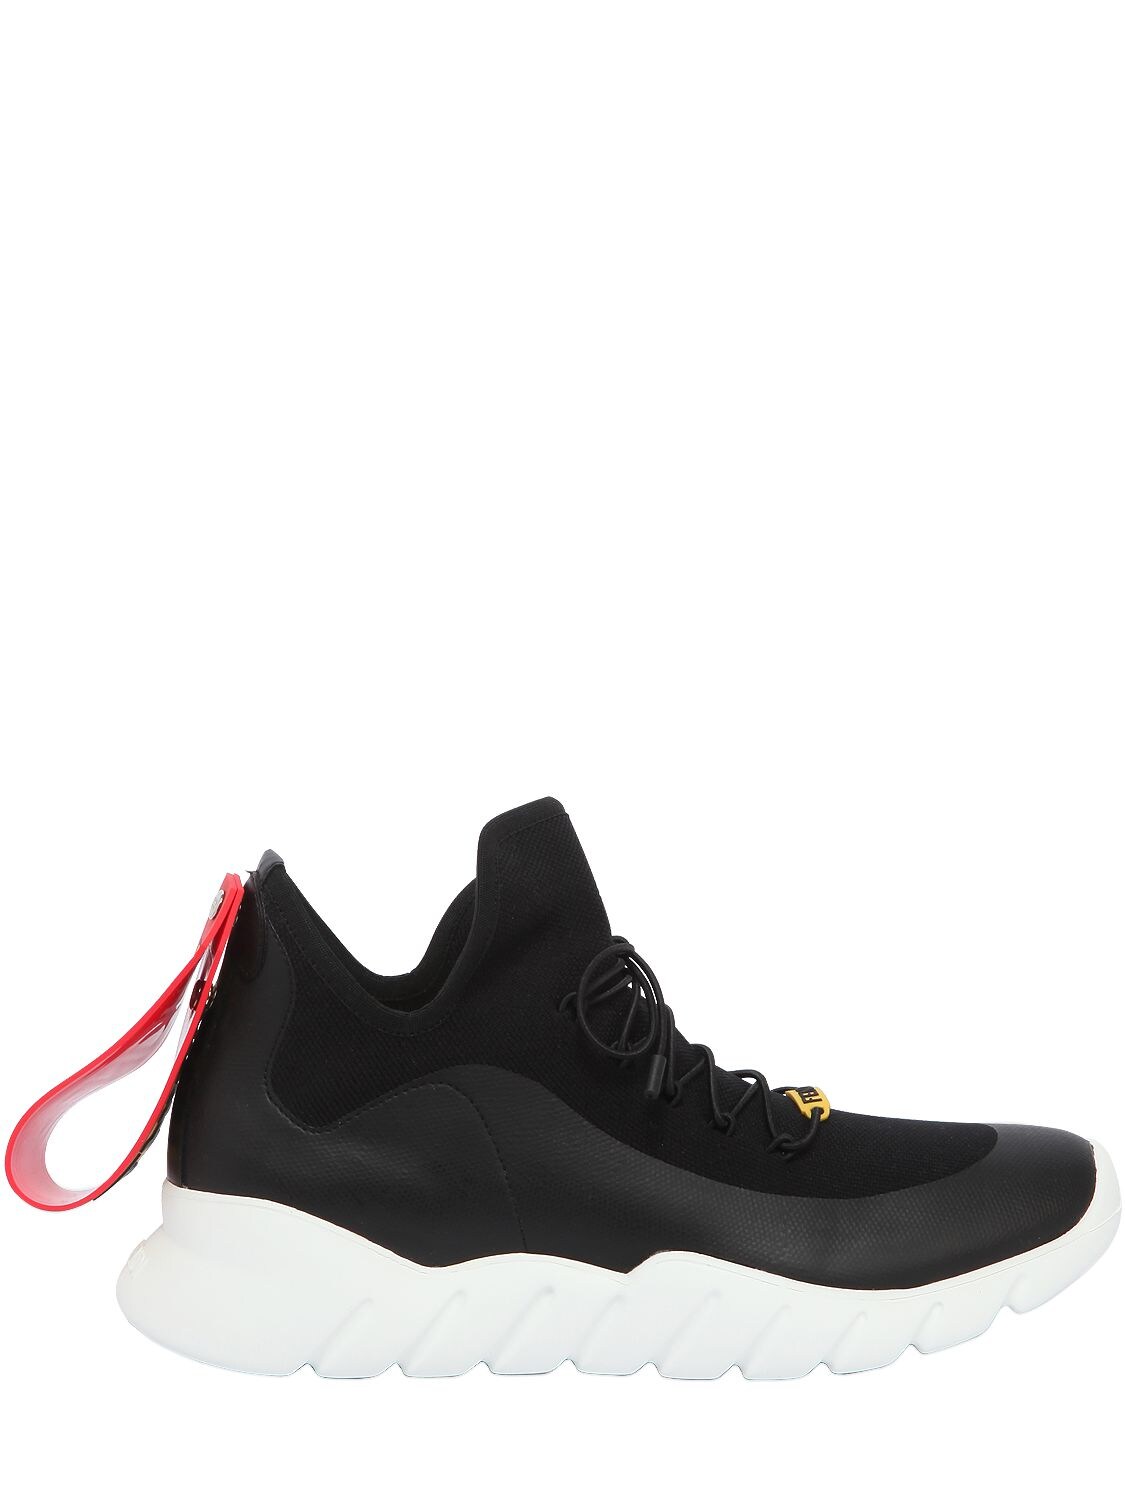 FENDI RUBBER TAG TECH KNIT RUNNING SNEAKERS,66IDNT007-RjEwMUo1